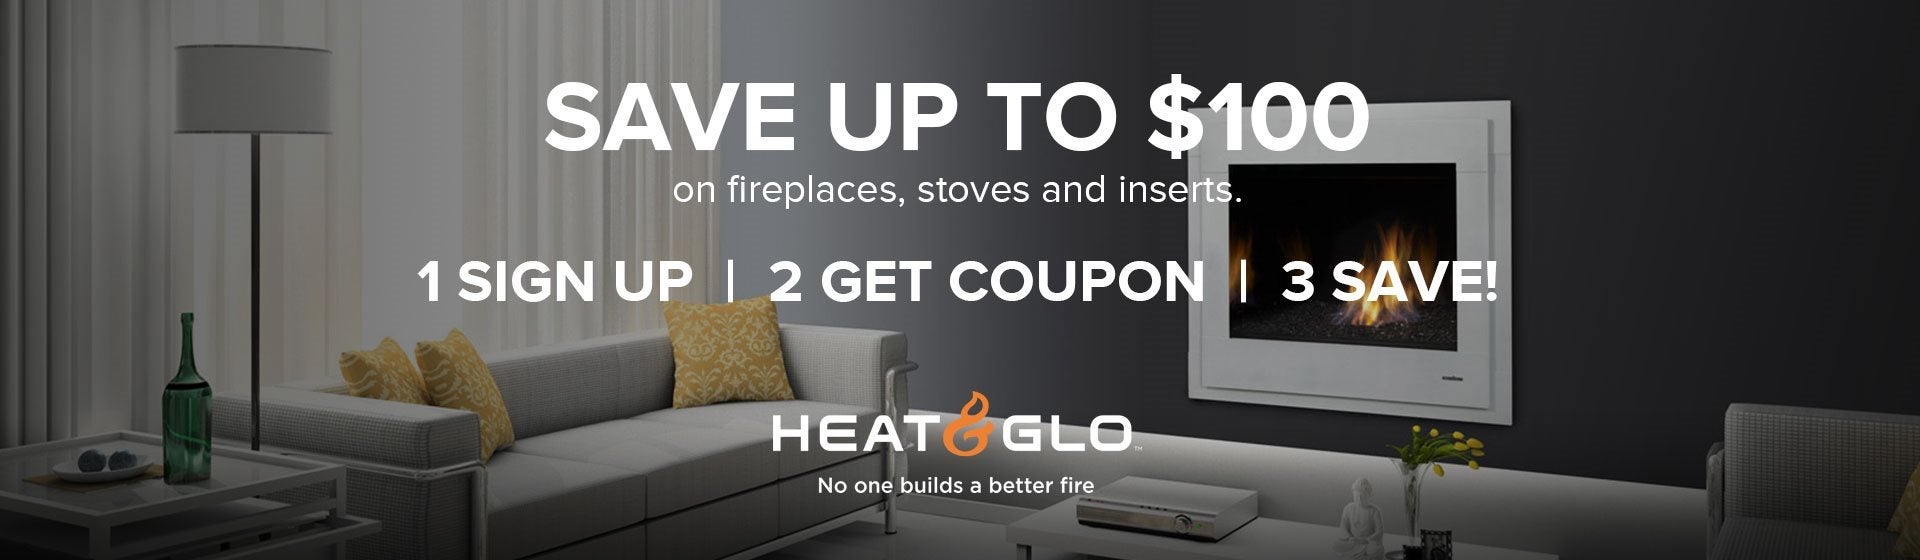 Save up to $100 or fireplaces, stoves and inserts.